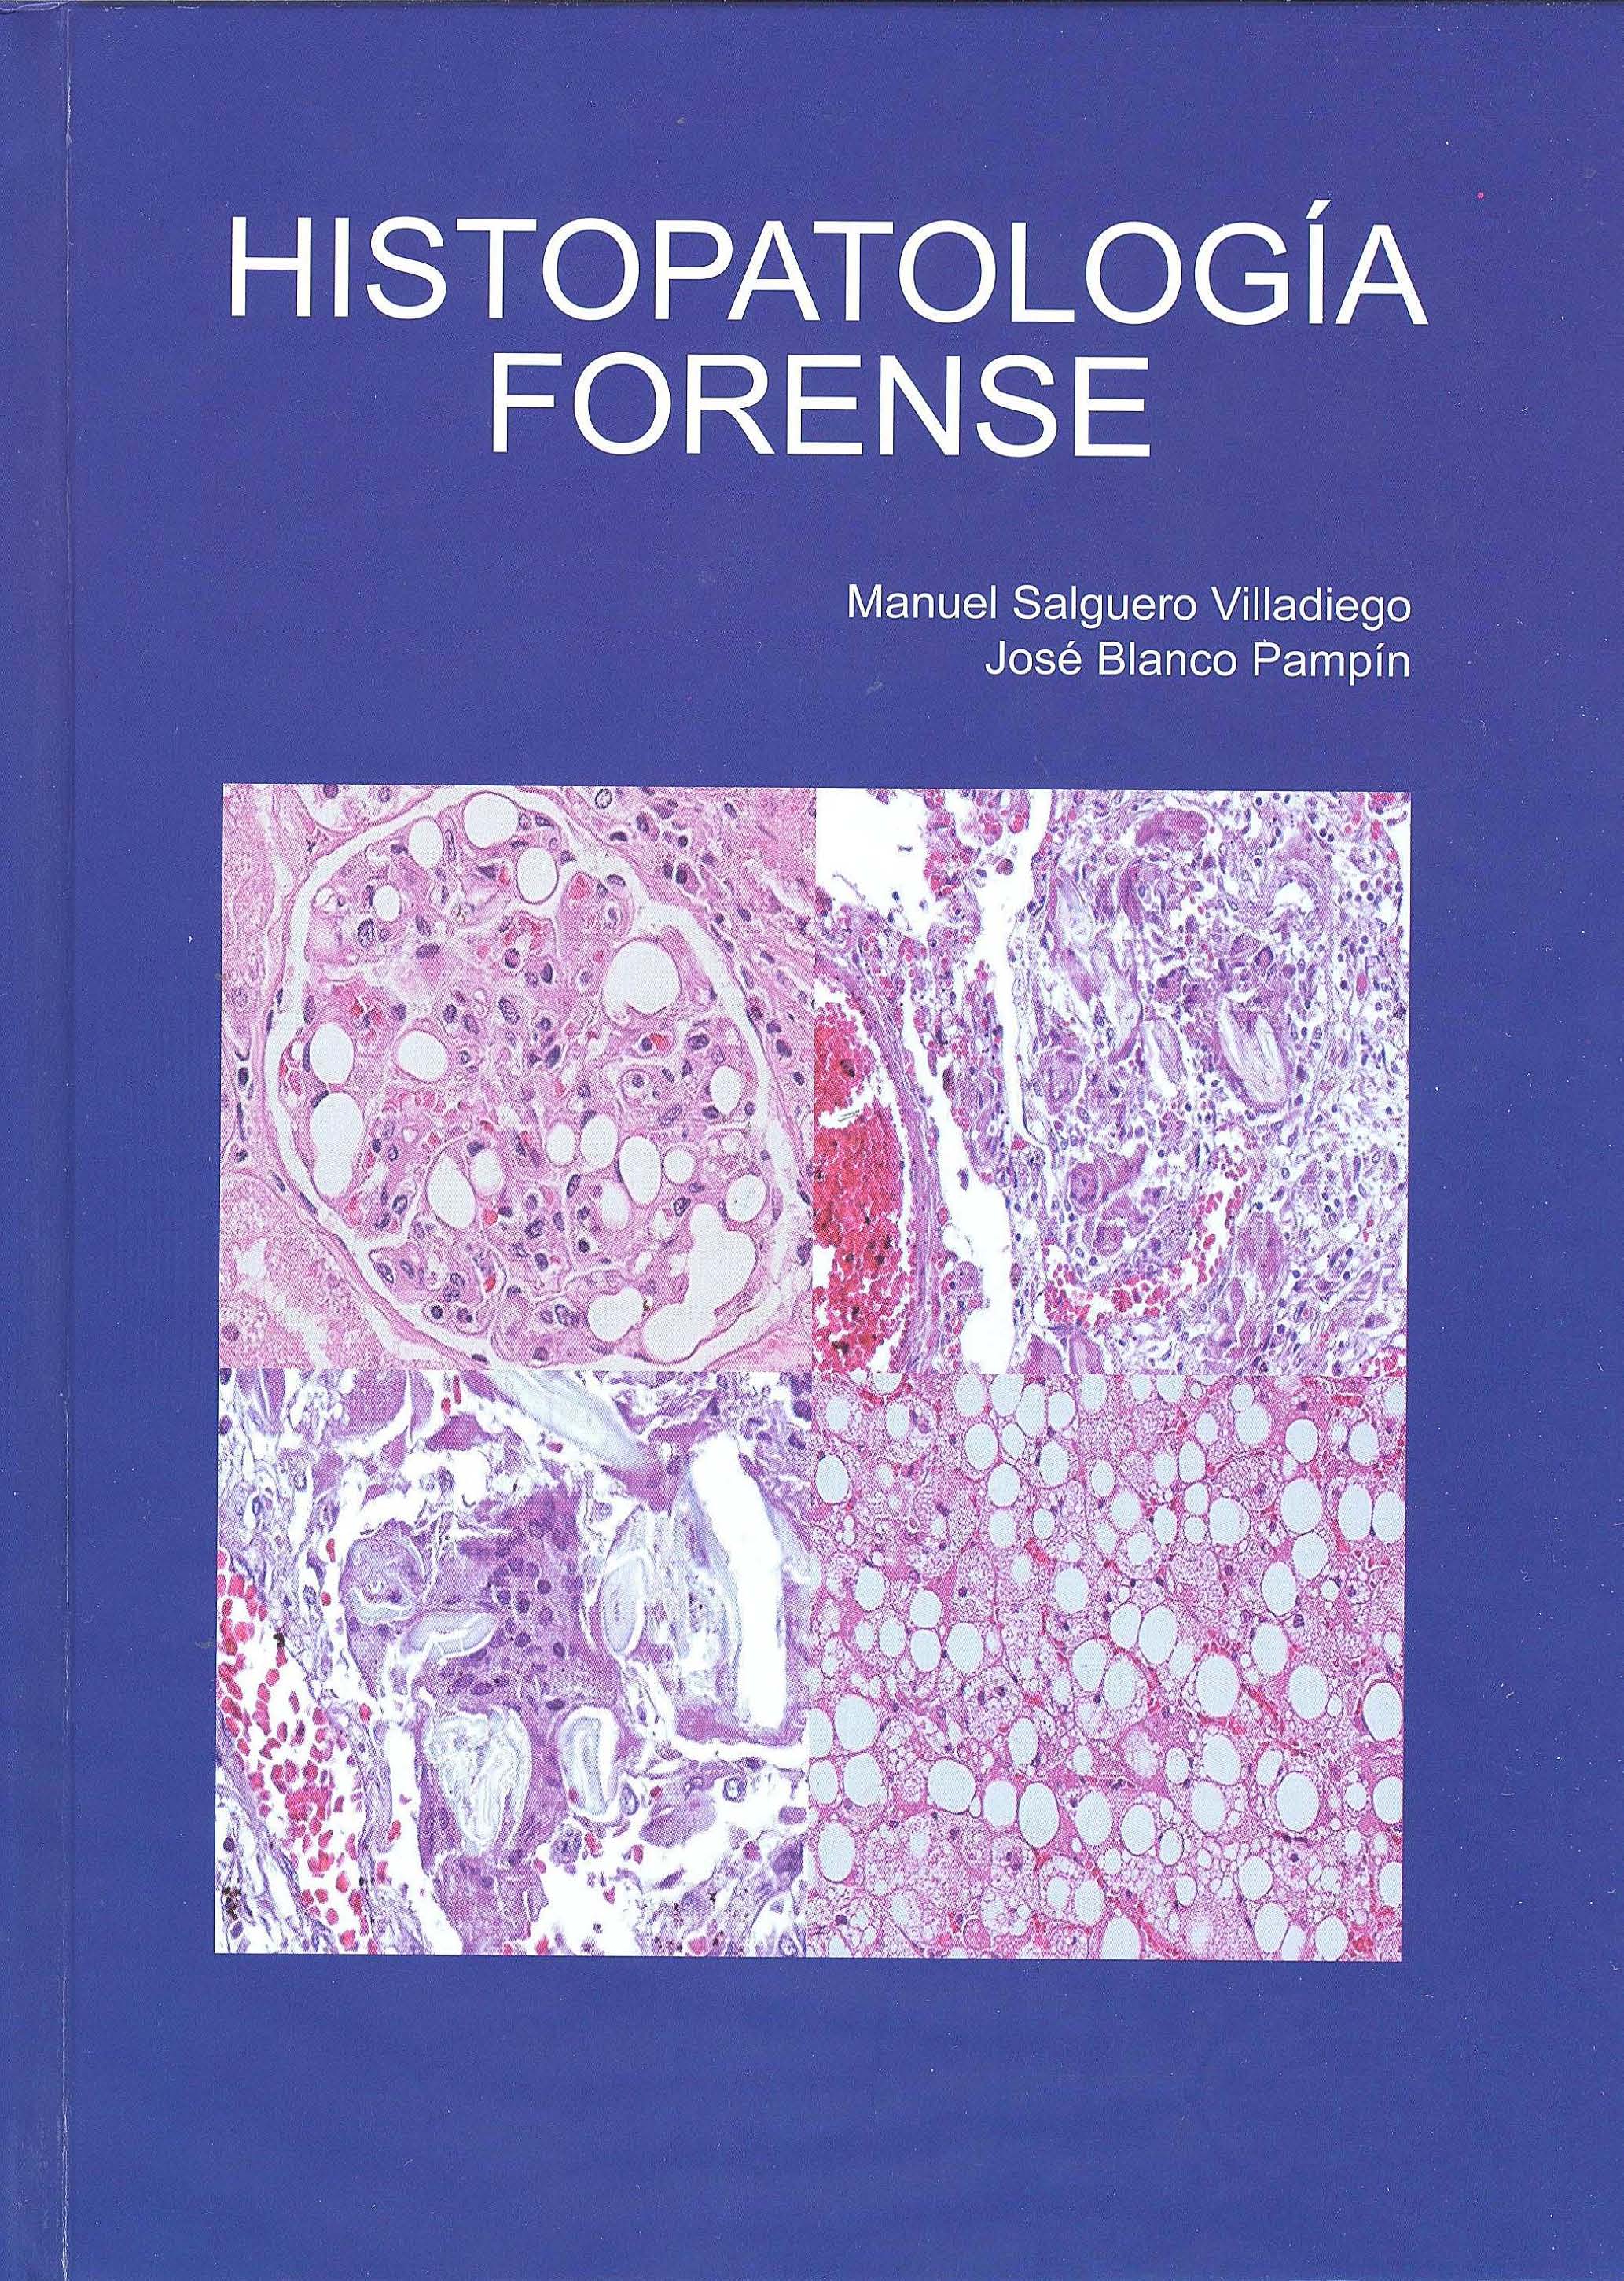 View details of Histopatología Forense, PDF